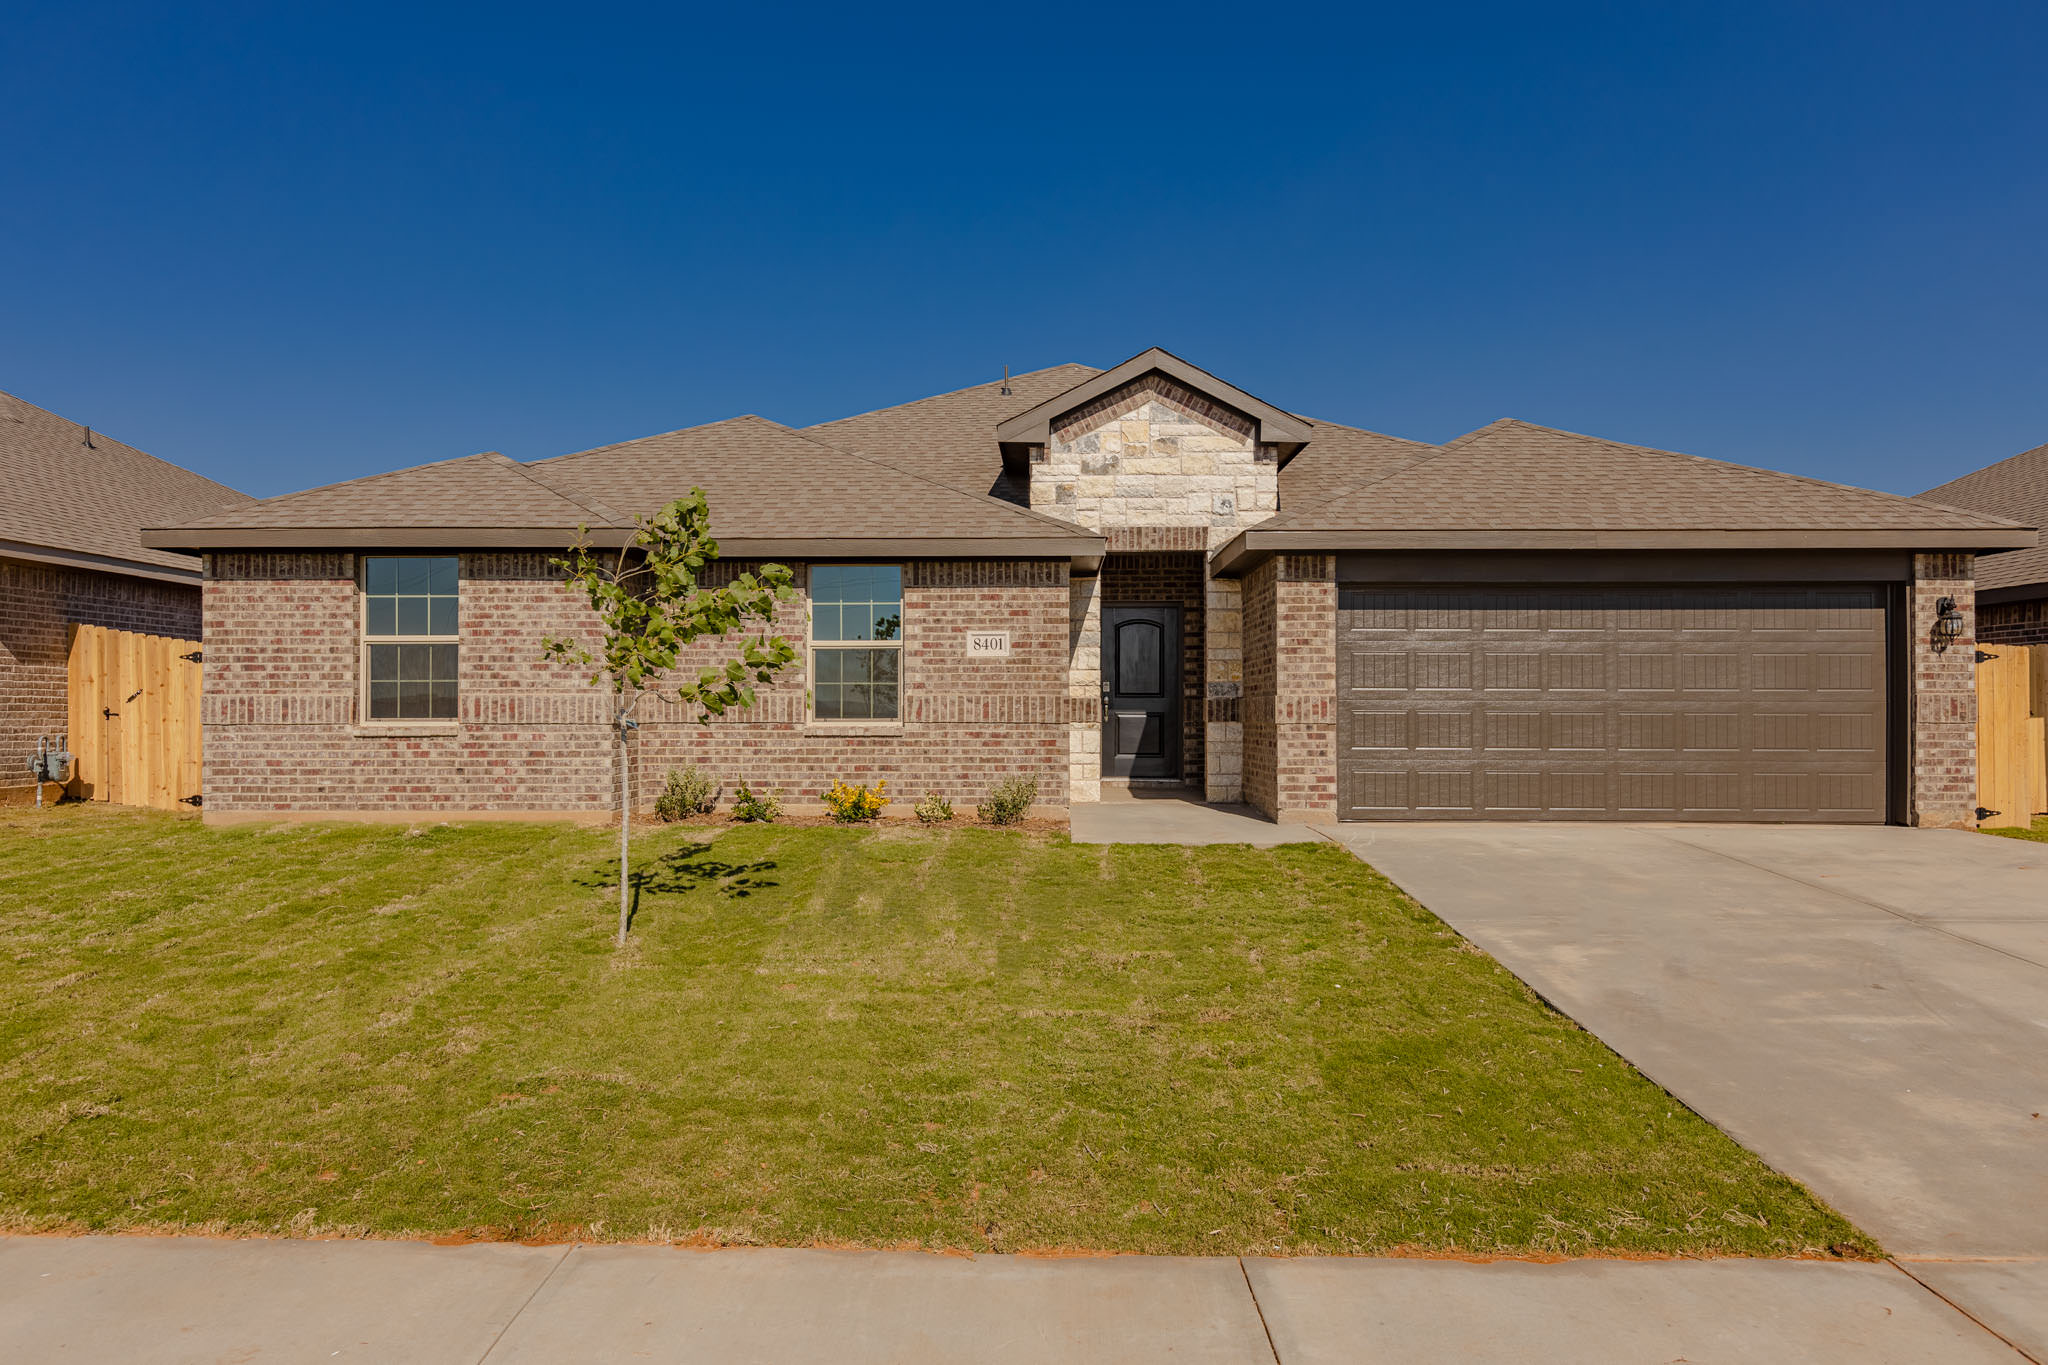 New Homes in Vander Ranch | MIDLAND, TX | Tradition Series